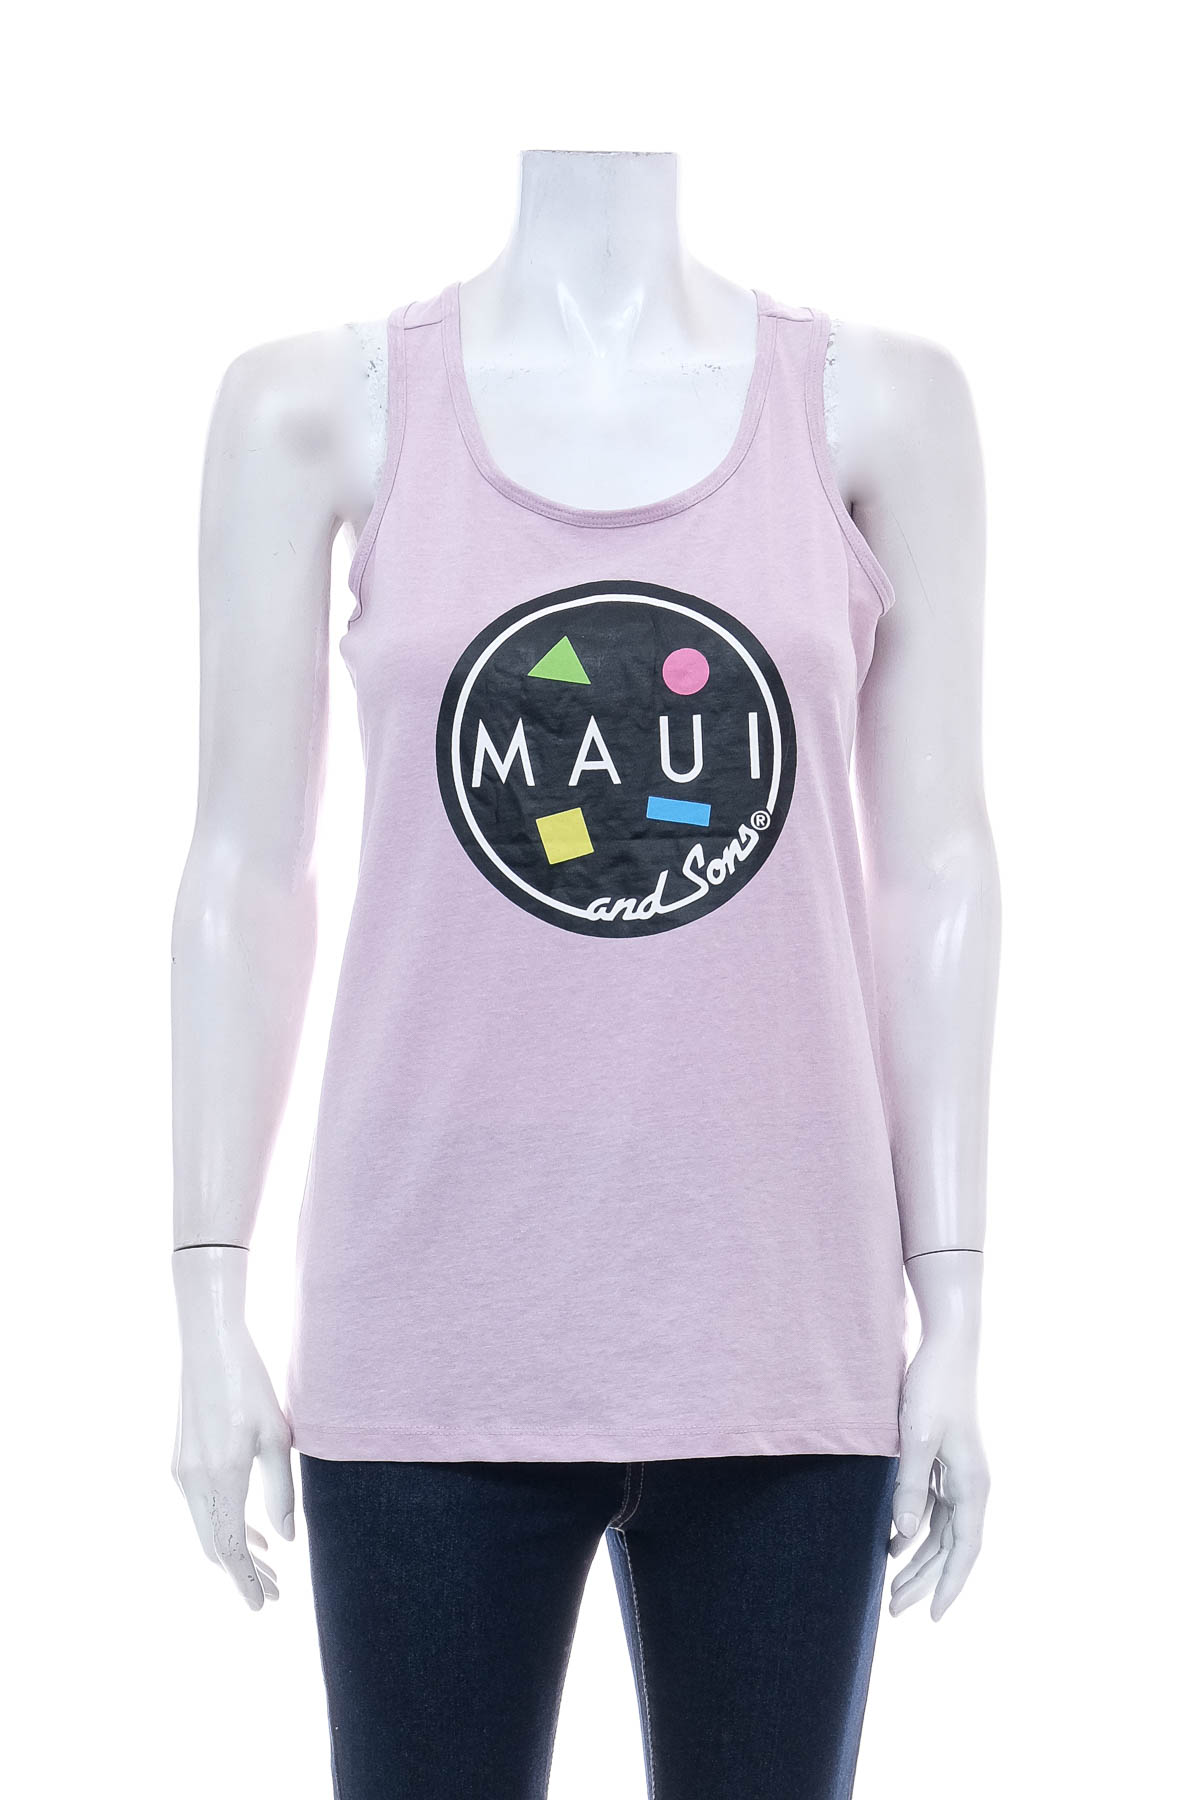 Women's top - MAUI and SONS - 0